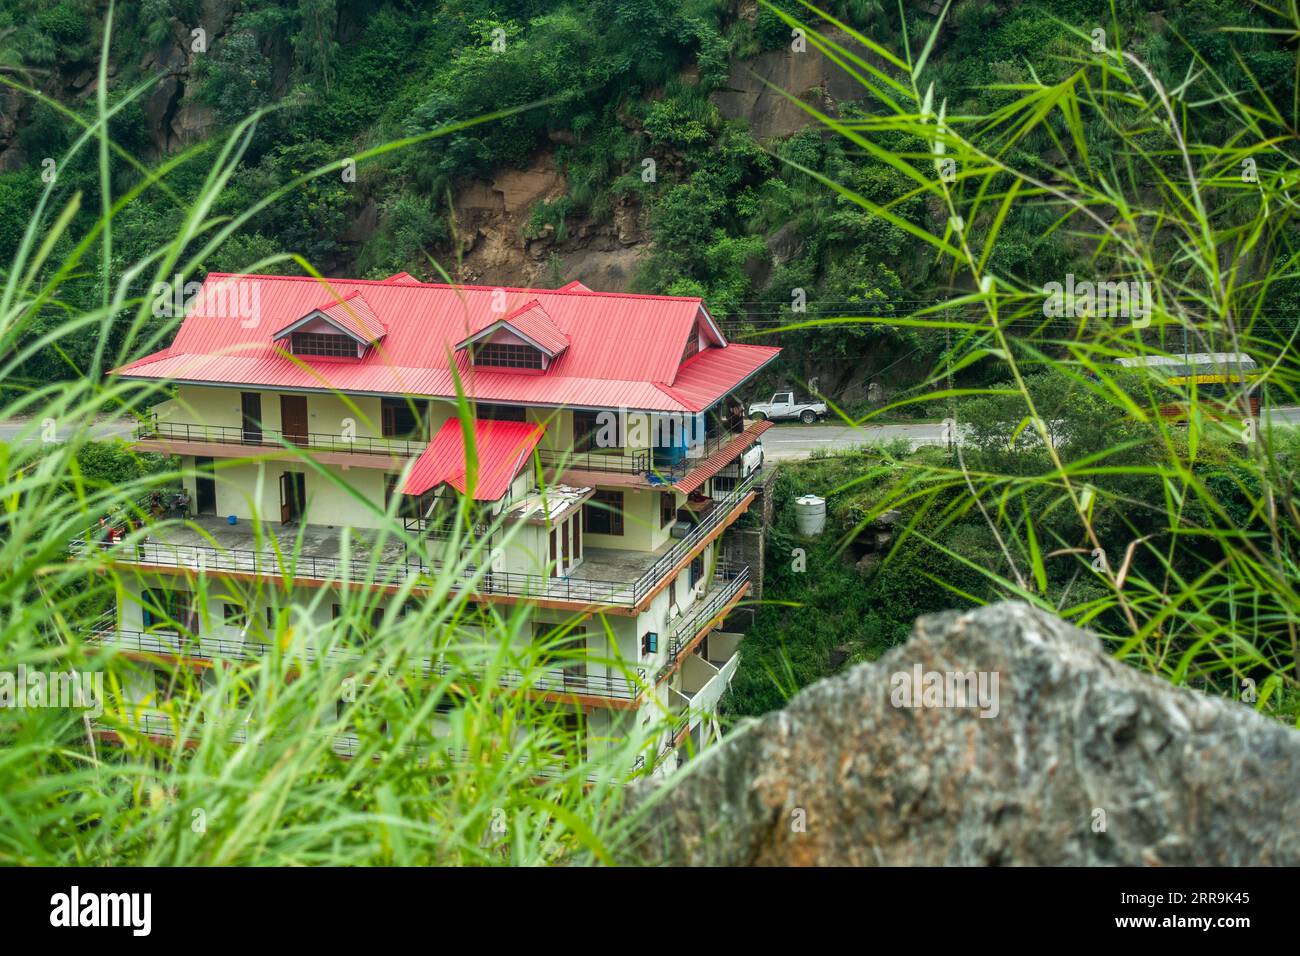 Mountain-side multistory building in Himachal Pradesh, offering homestay and vacation home accommodations. Stock Photo